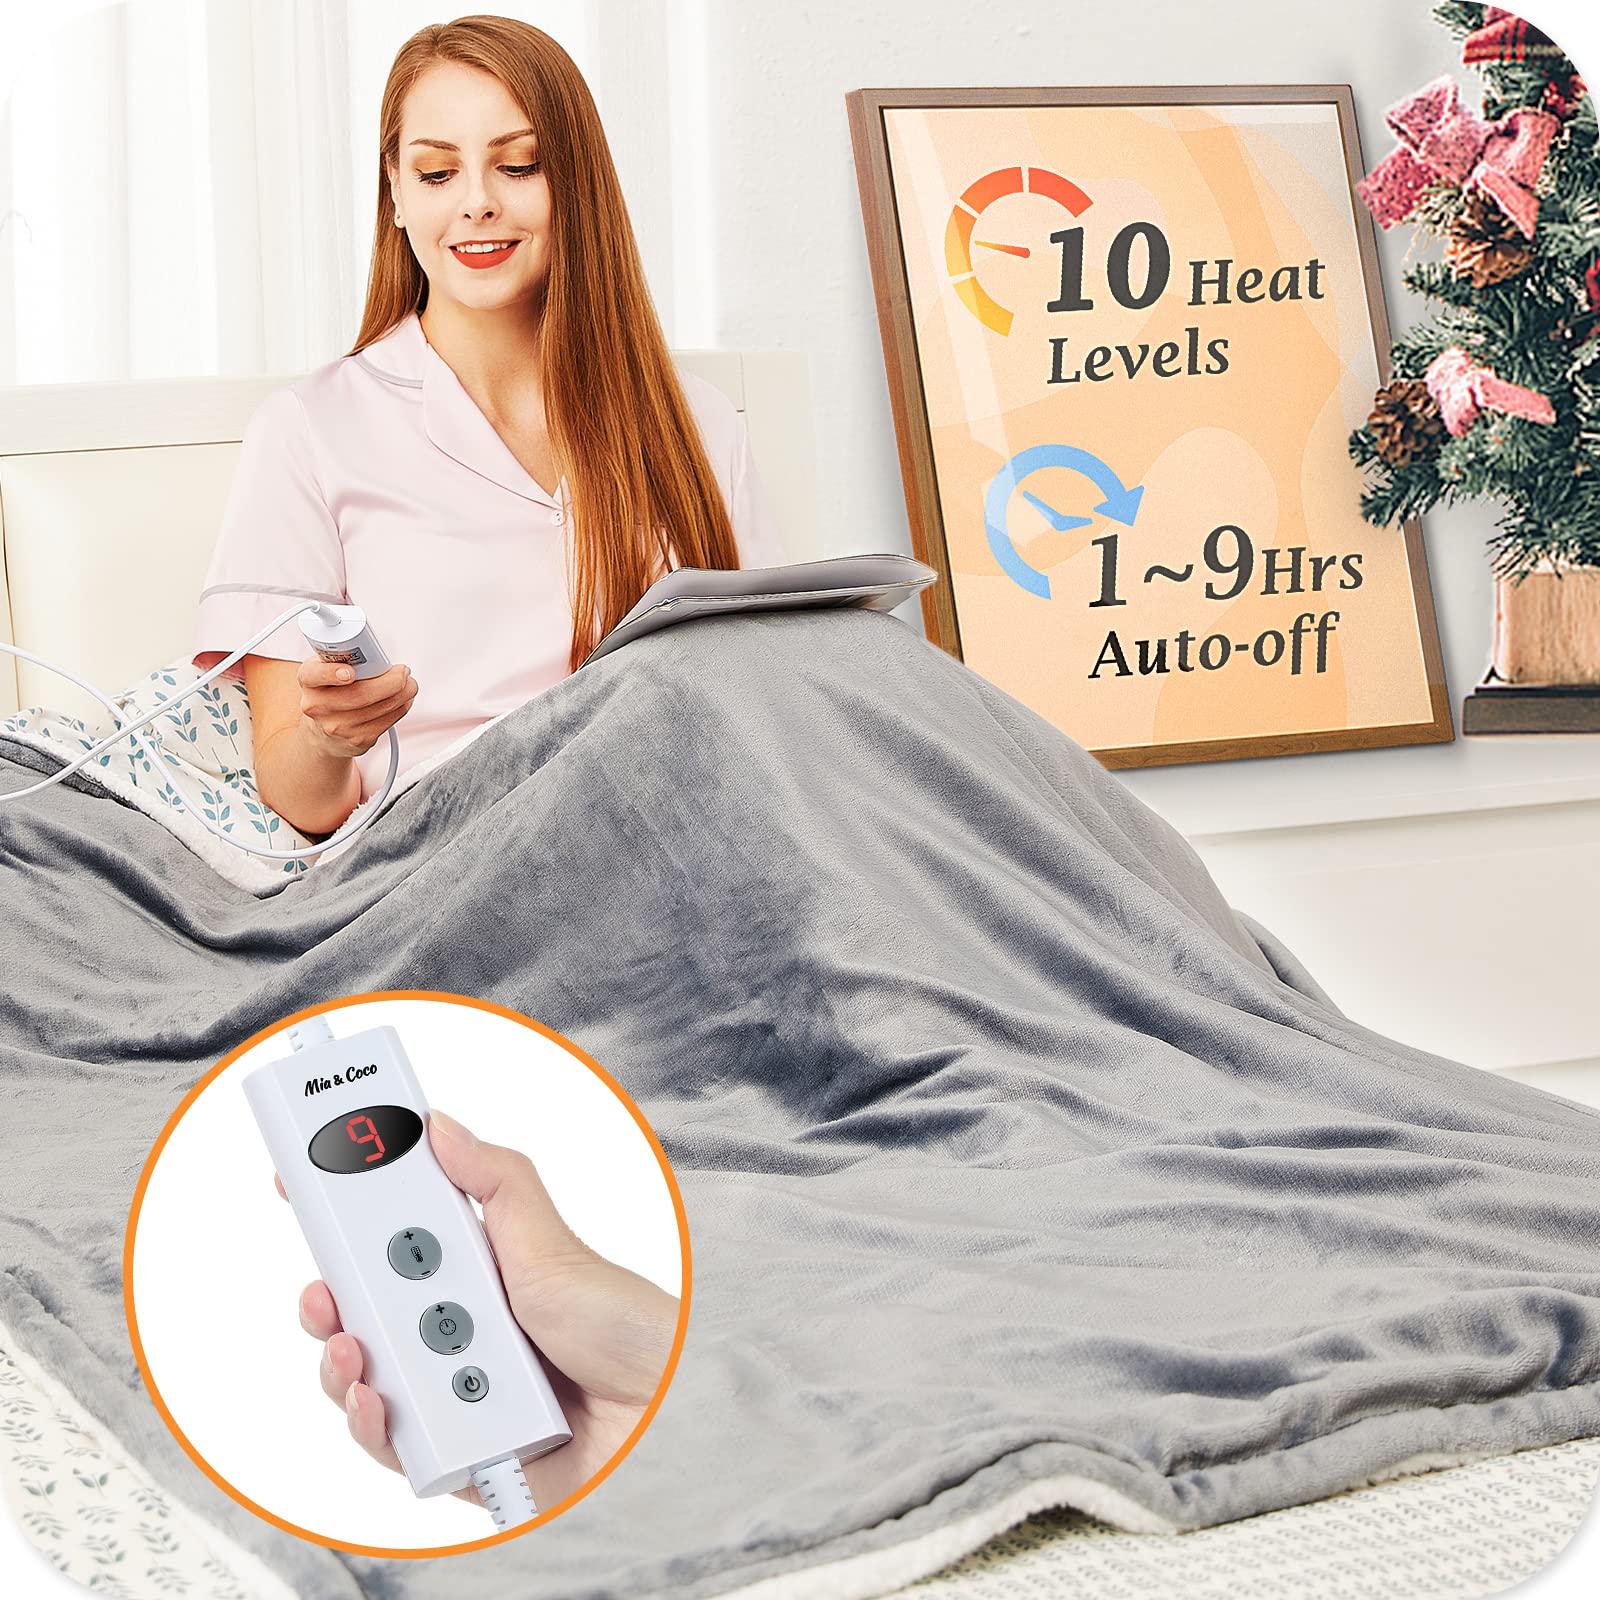 Mia&Coco Electric Heated Blanket Throw Flannel Sherpa Fast Heating 120x160cm, 10 Heat Levels & Up-to-9-Hours Auto-Off Timer & LED Display, for Home Office Use, Machine Washable, ETL Certified, Grey